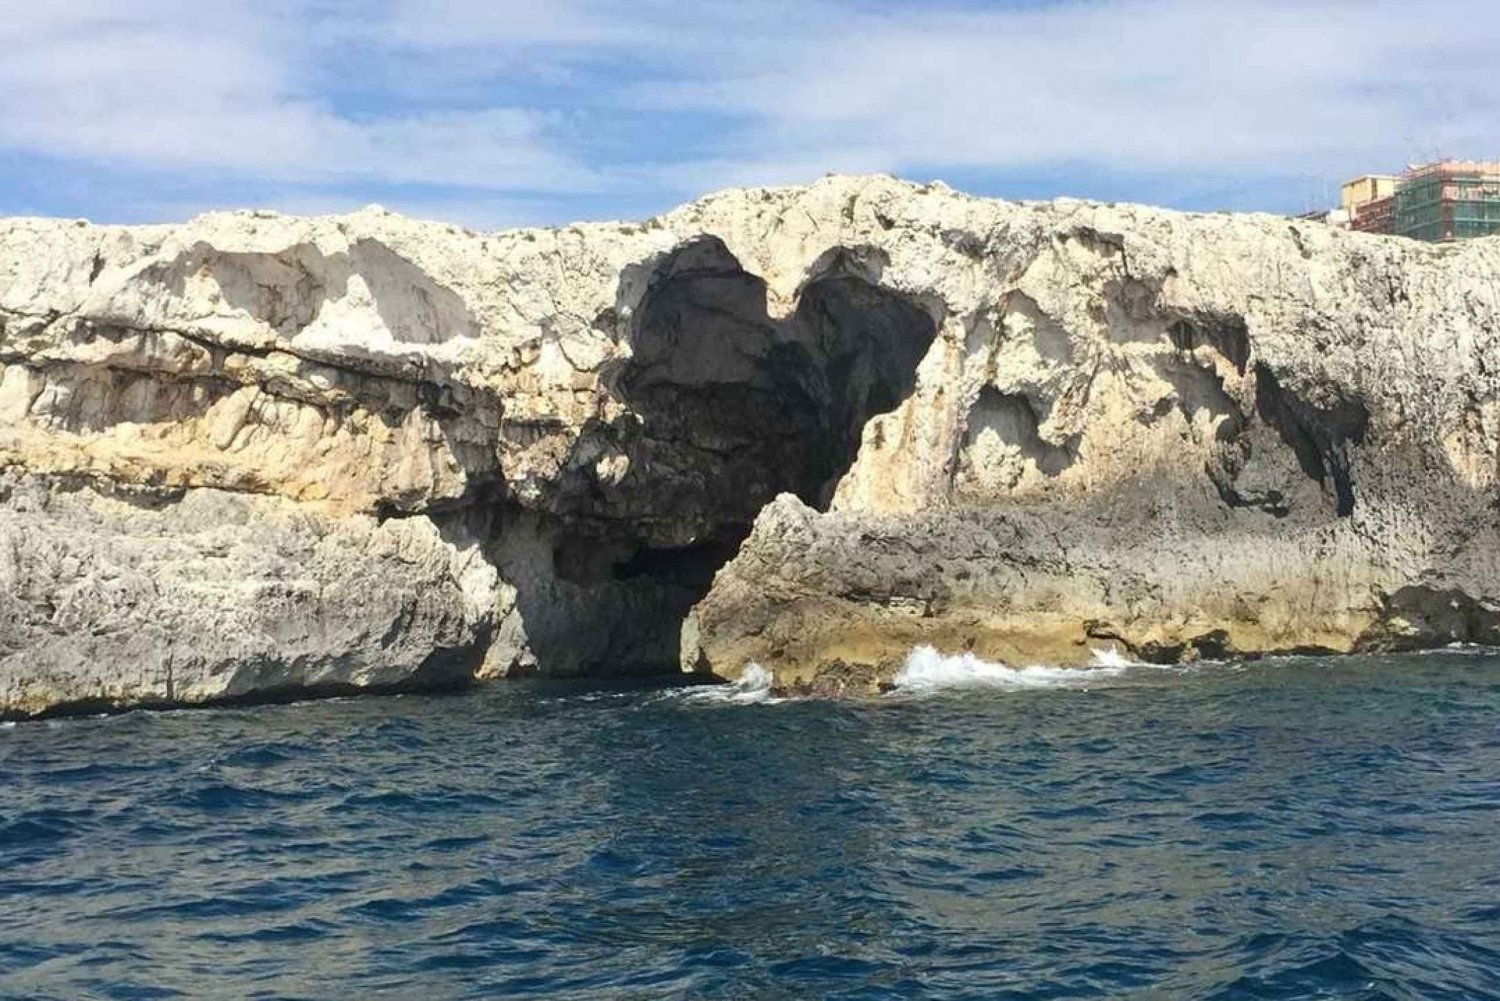 Siracusa: Ortygia Island Boat Tour med besøg i grotte